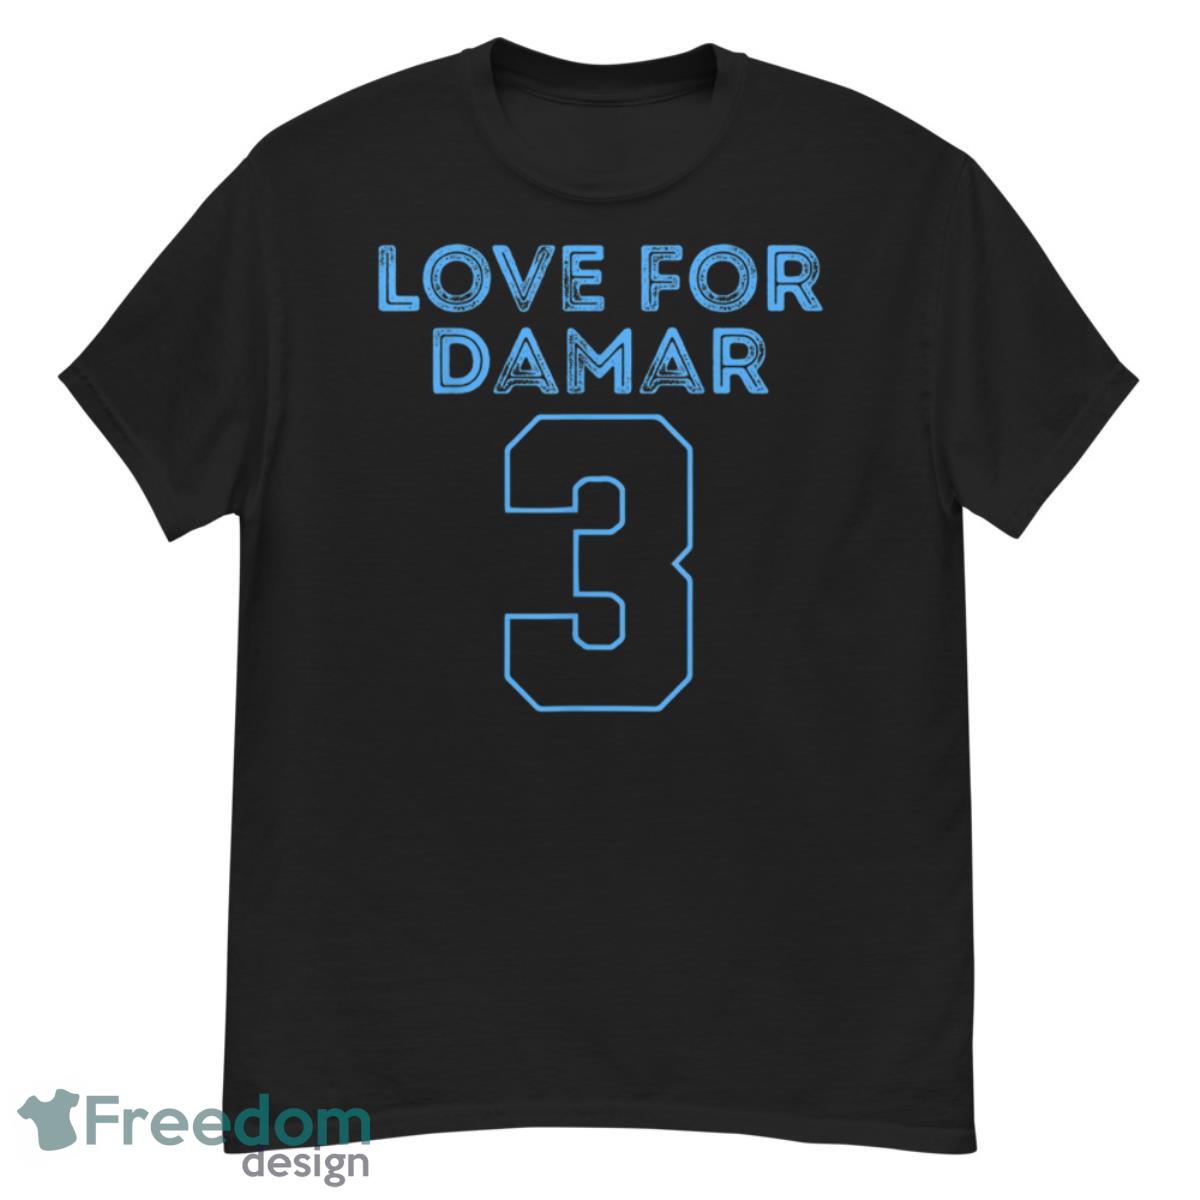 Pray for Damar 3 Buffalo Love For 3 We are with you T-Shirt - G500 Men’s Classic T-Shirt